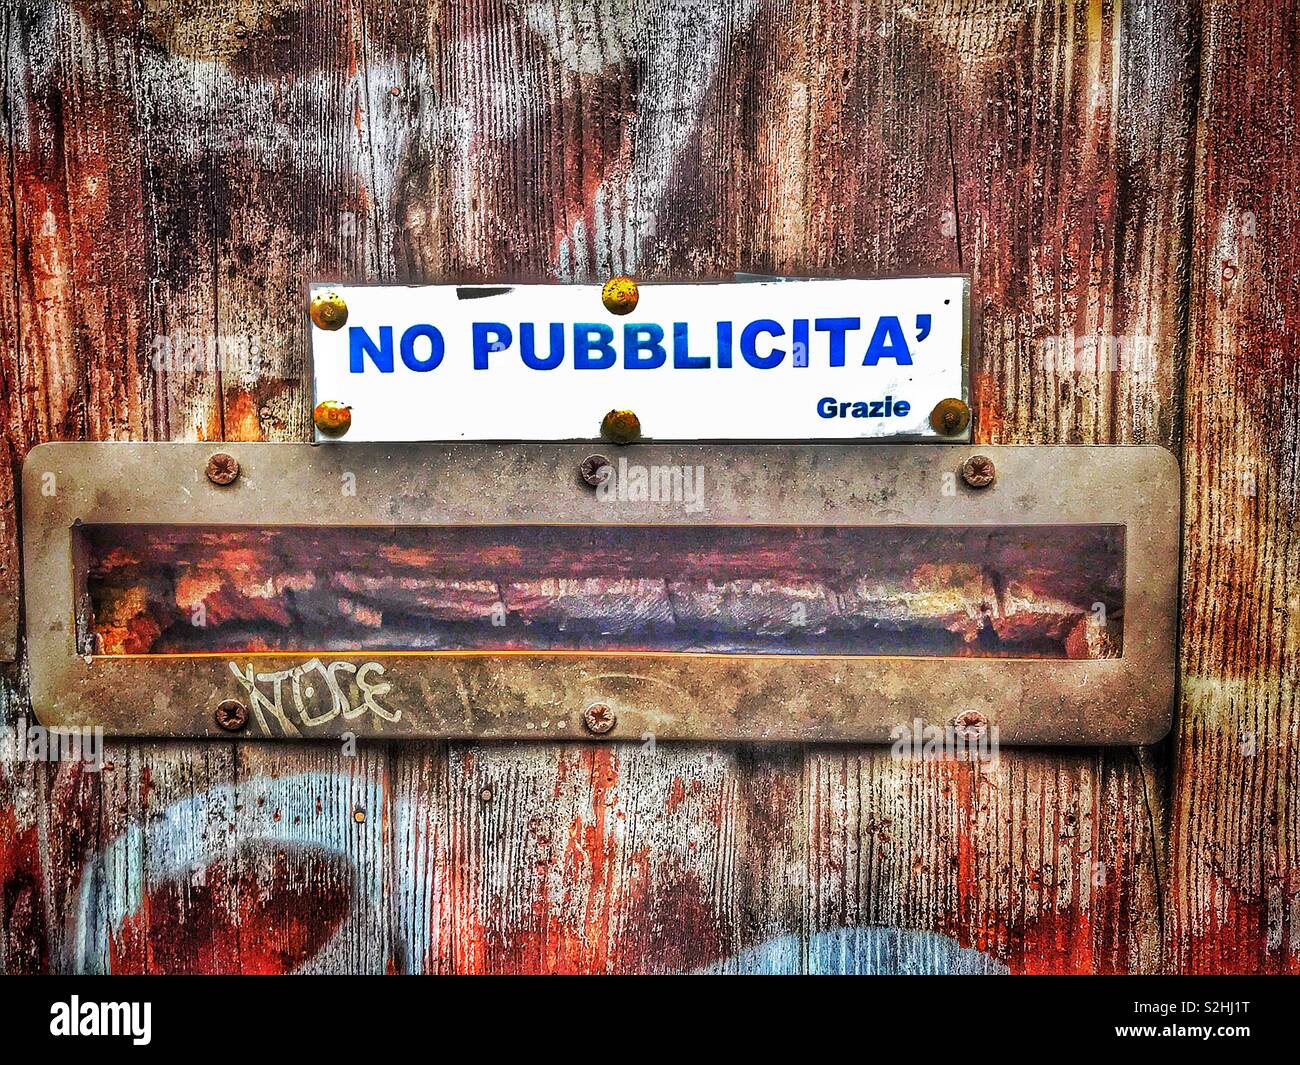 No Junk mail please, Italian style...no pubblicita grazie....request above letter box of weathered wooden door Stock Photo